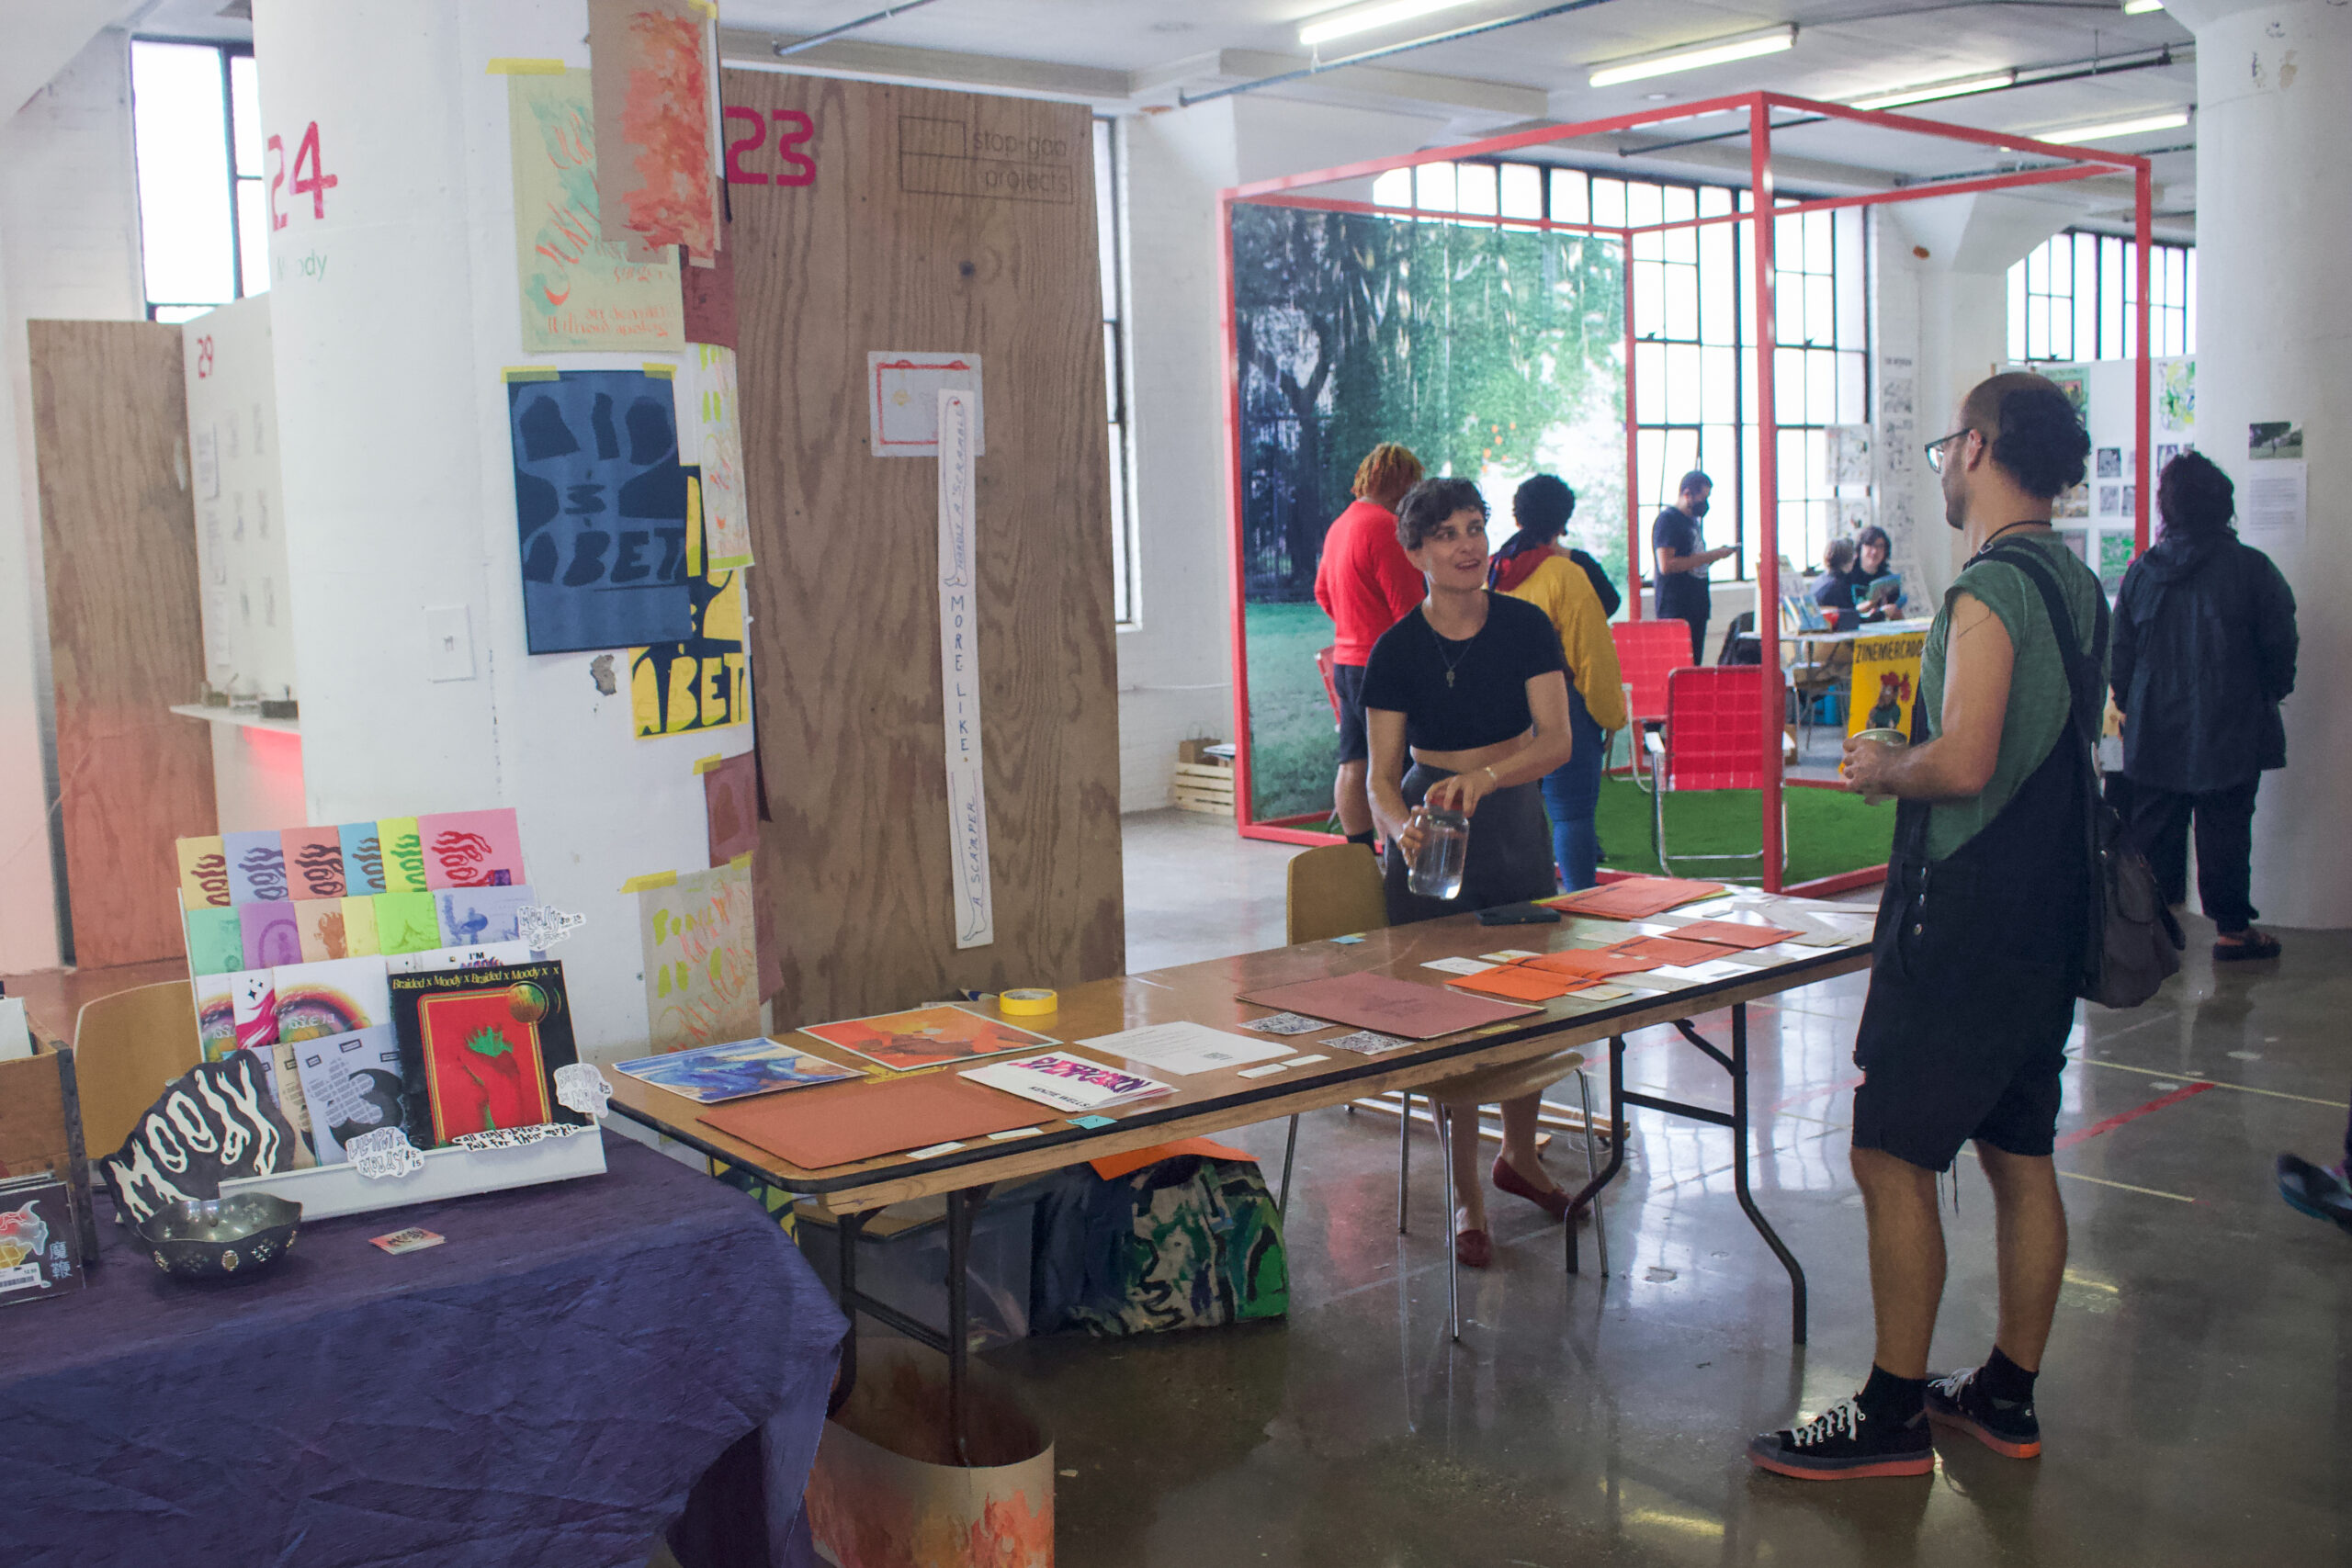 Two people standing and talking to each other across from a long table with printed art and publications for display. In the background, there is an art installation framed by a red cube with people standing around it.